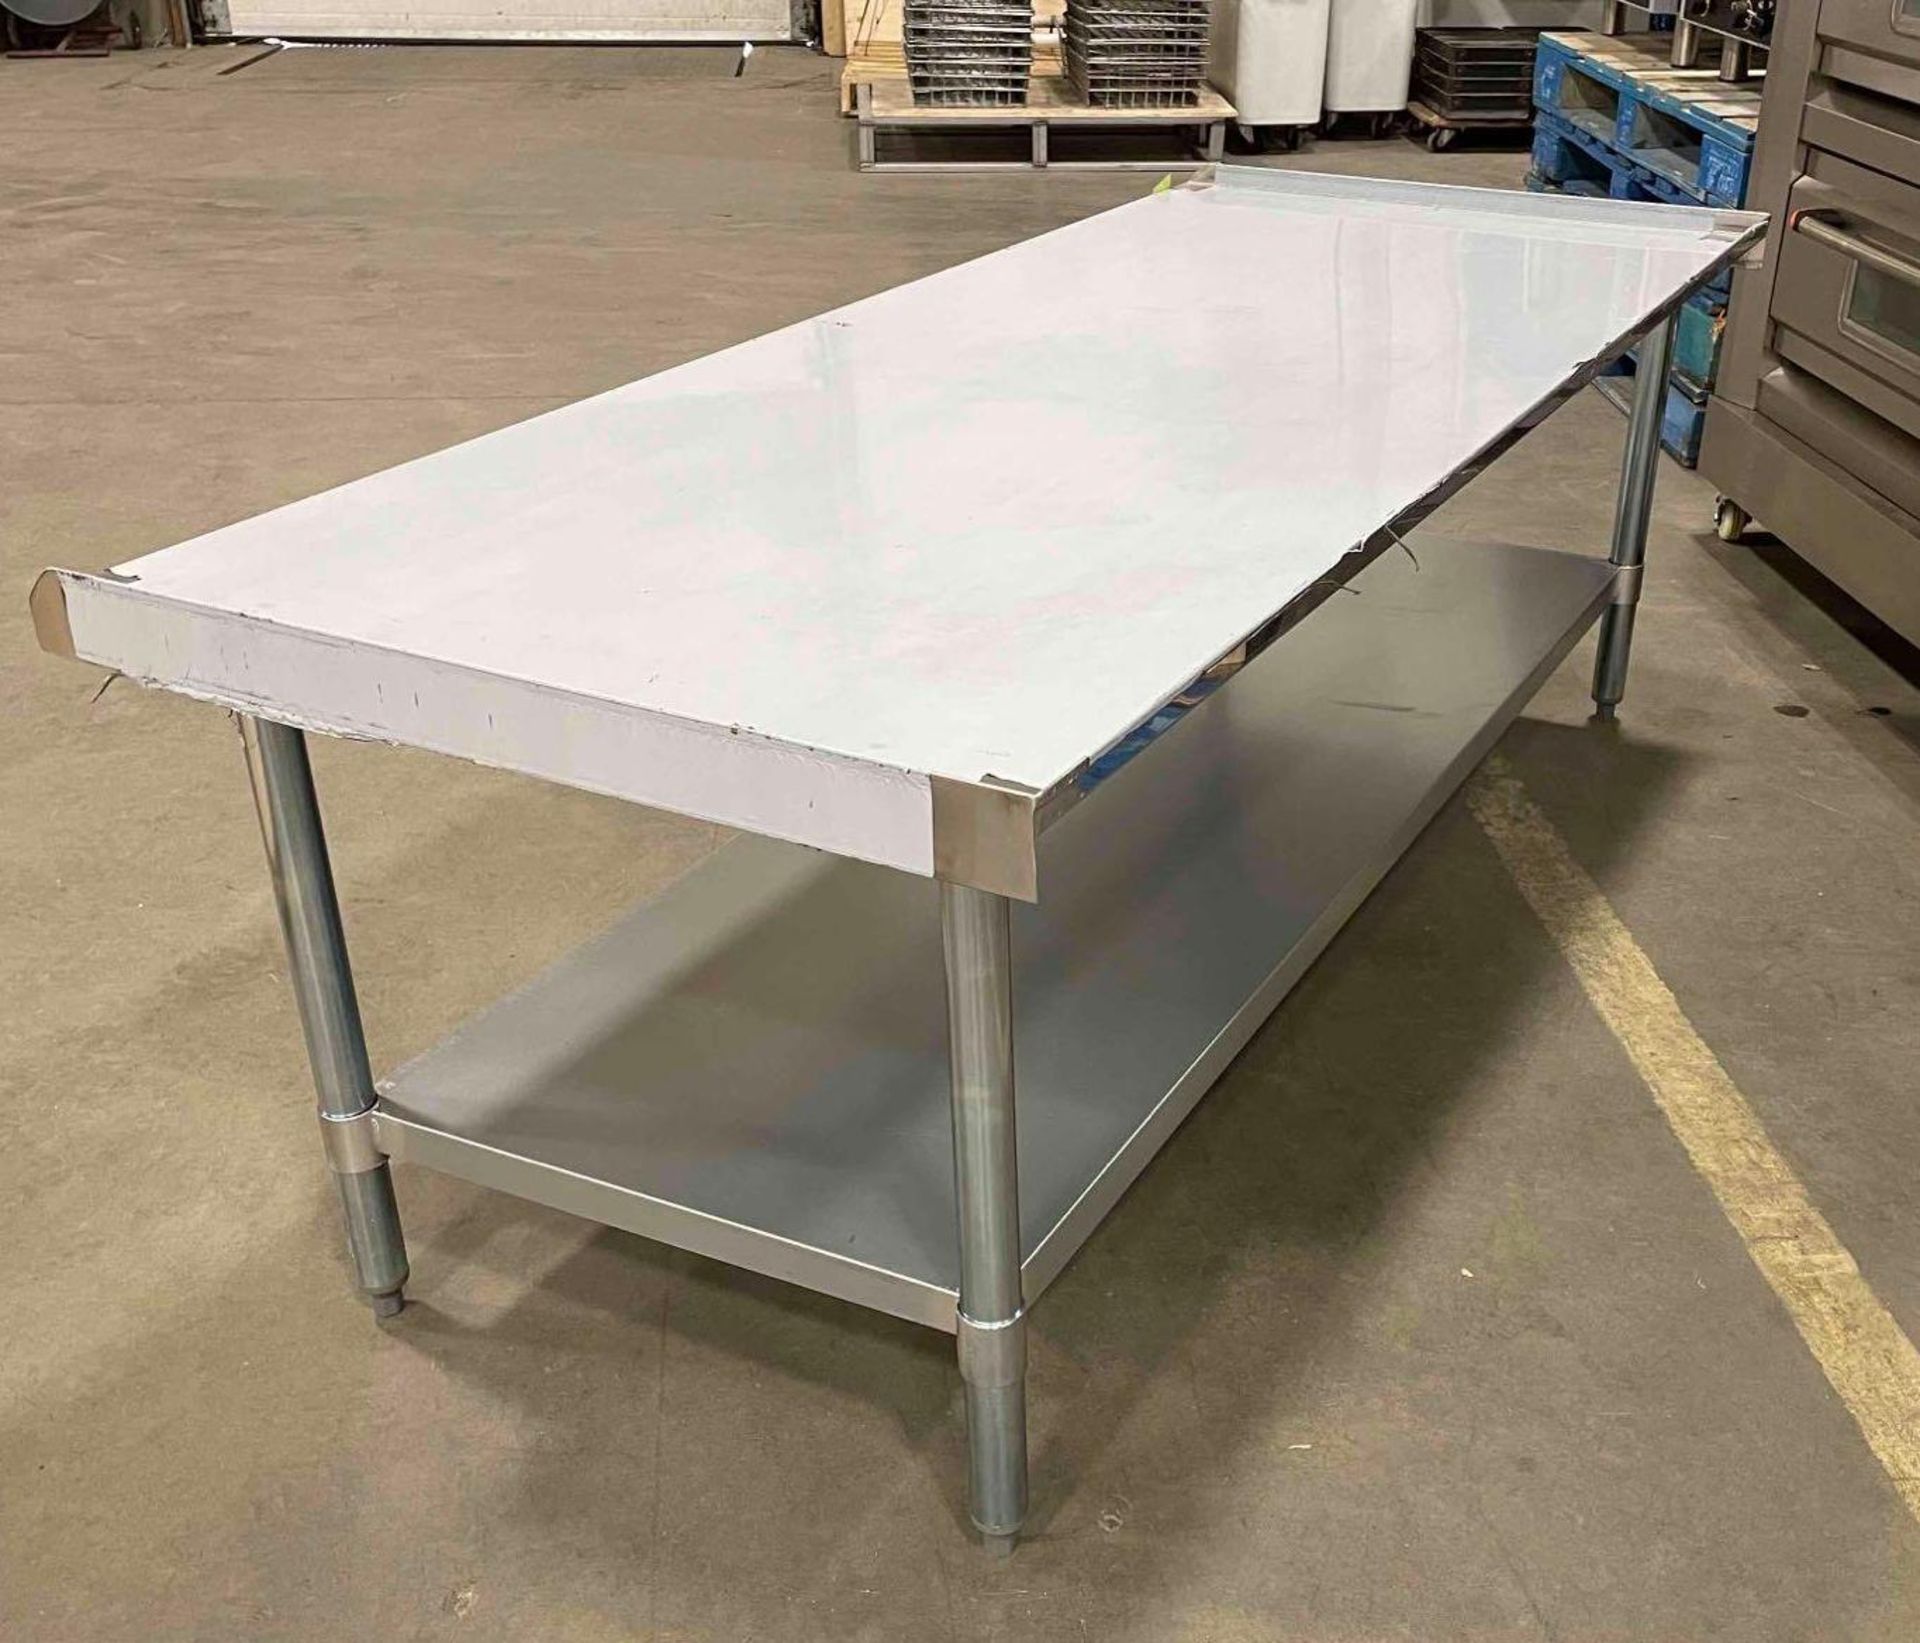 NEW 30" X 72" STAINLESS STEEL EQUIPMENT STAND WITH UNDERSHELF - Image 5 of 7